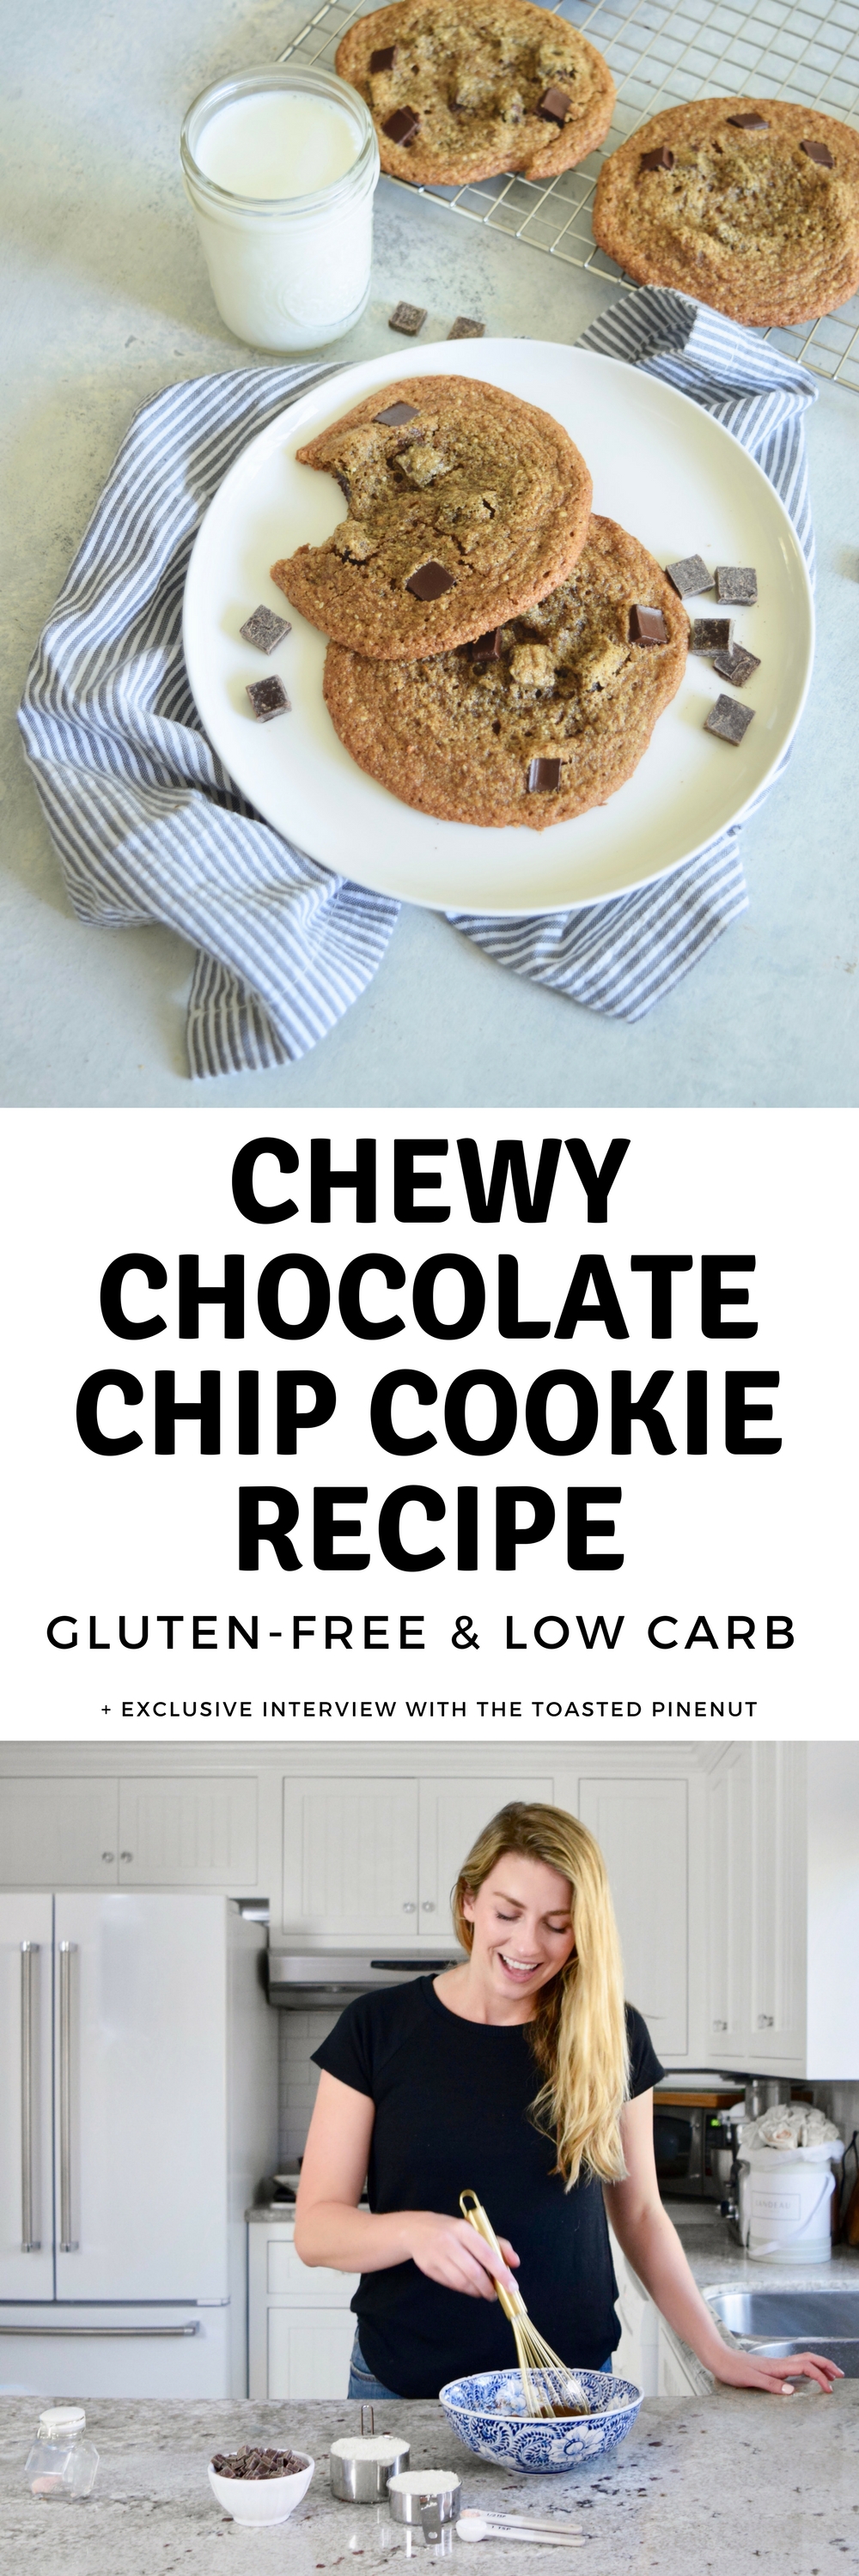 Chewy Chocolate Chip Cookies Recipe Gluten Free Low Carb